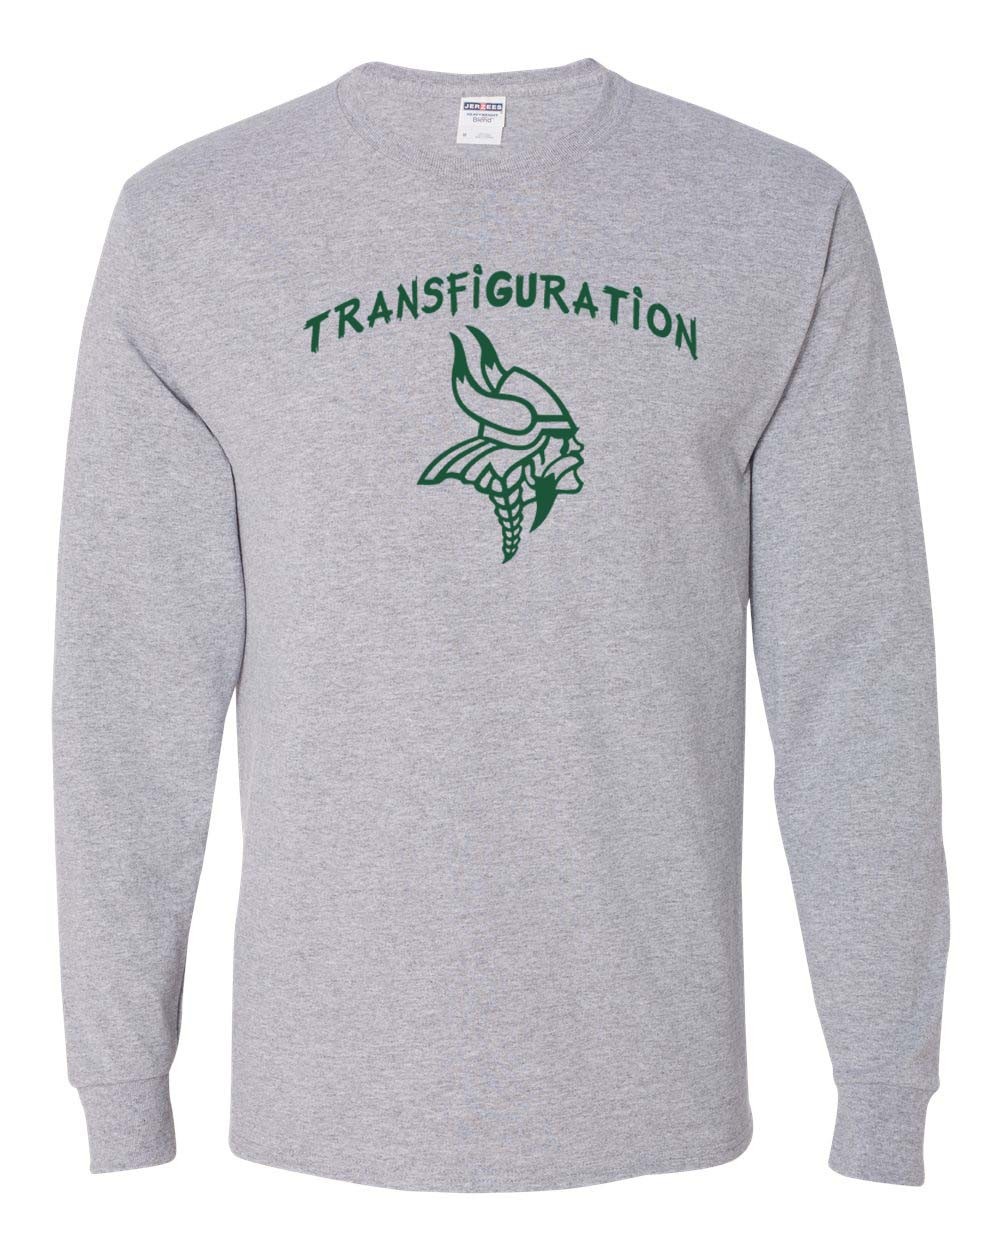 Transfiguration L/S Grey Gym T-Shirt w/ School Logo *Sale Price is in stock only